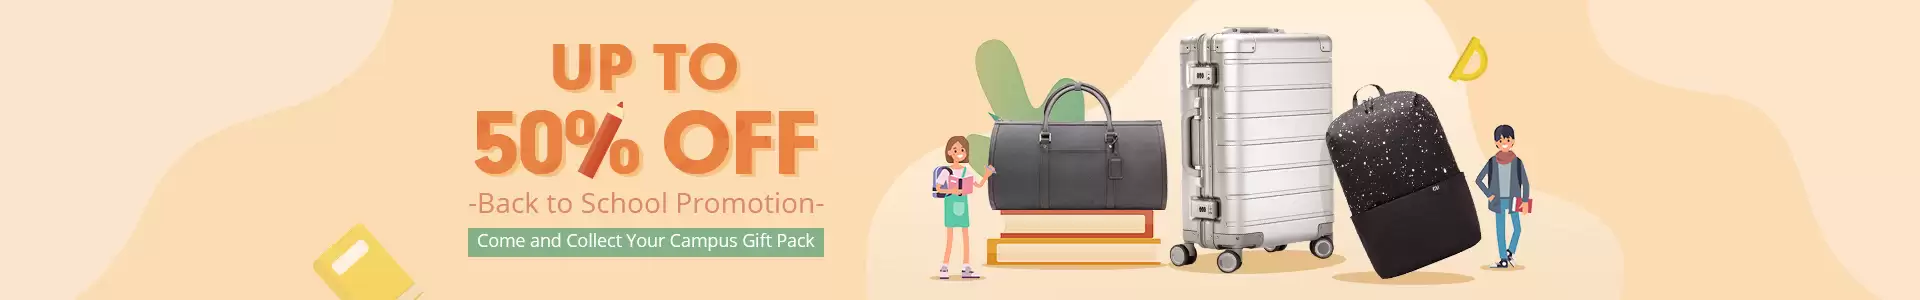 Get 20% Discount On Back To School Promotion With This Coupon At Banggood